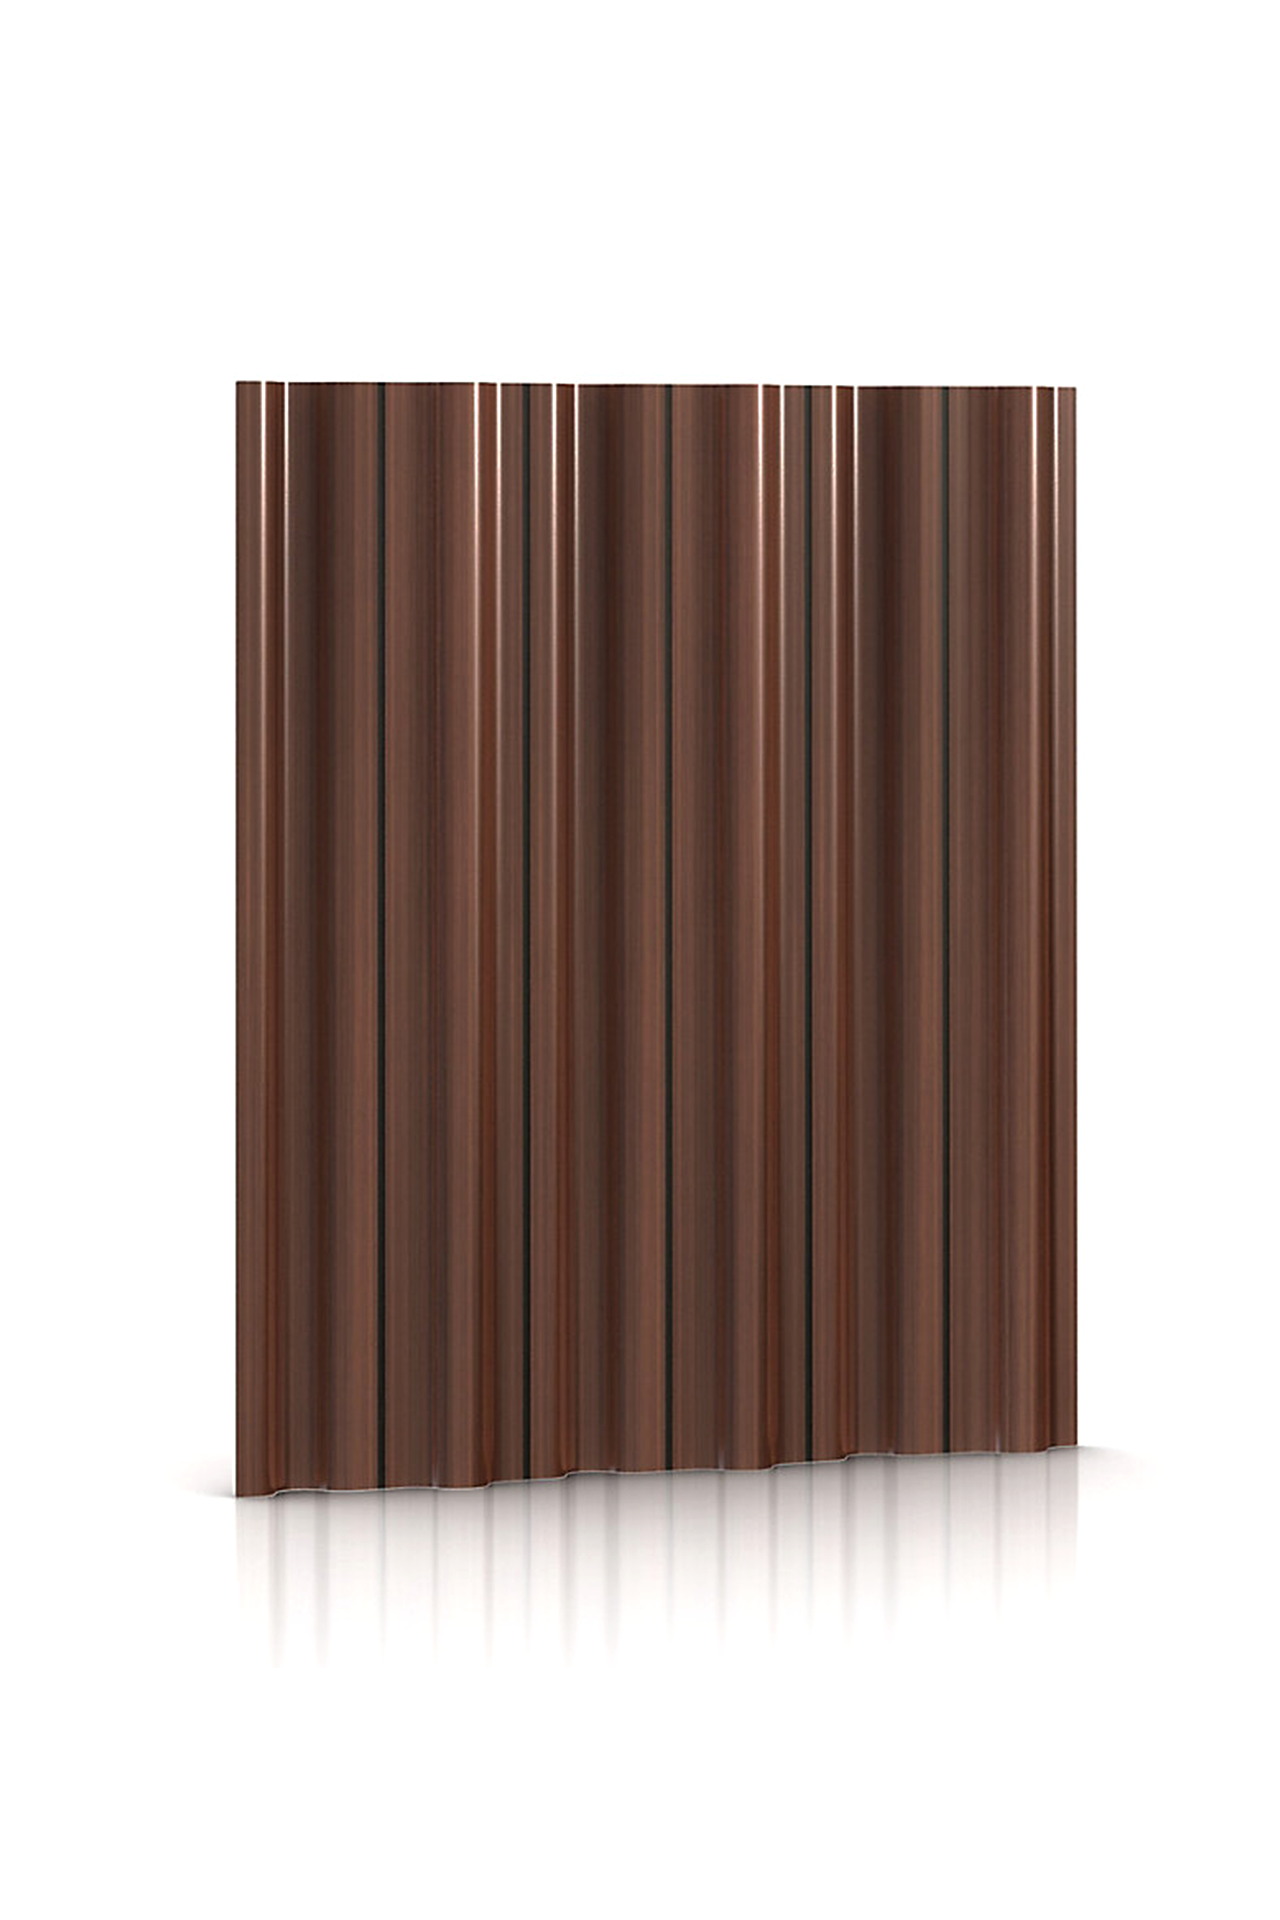 Eames Molded Plywood Folding Screen (4673018986611)